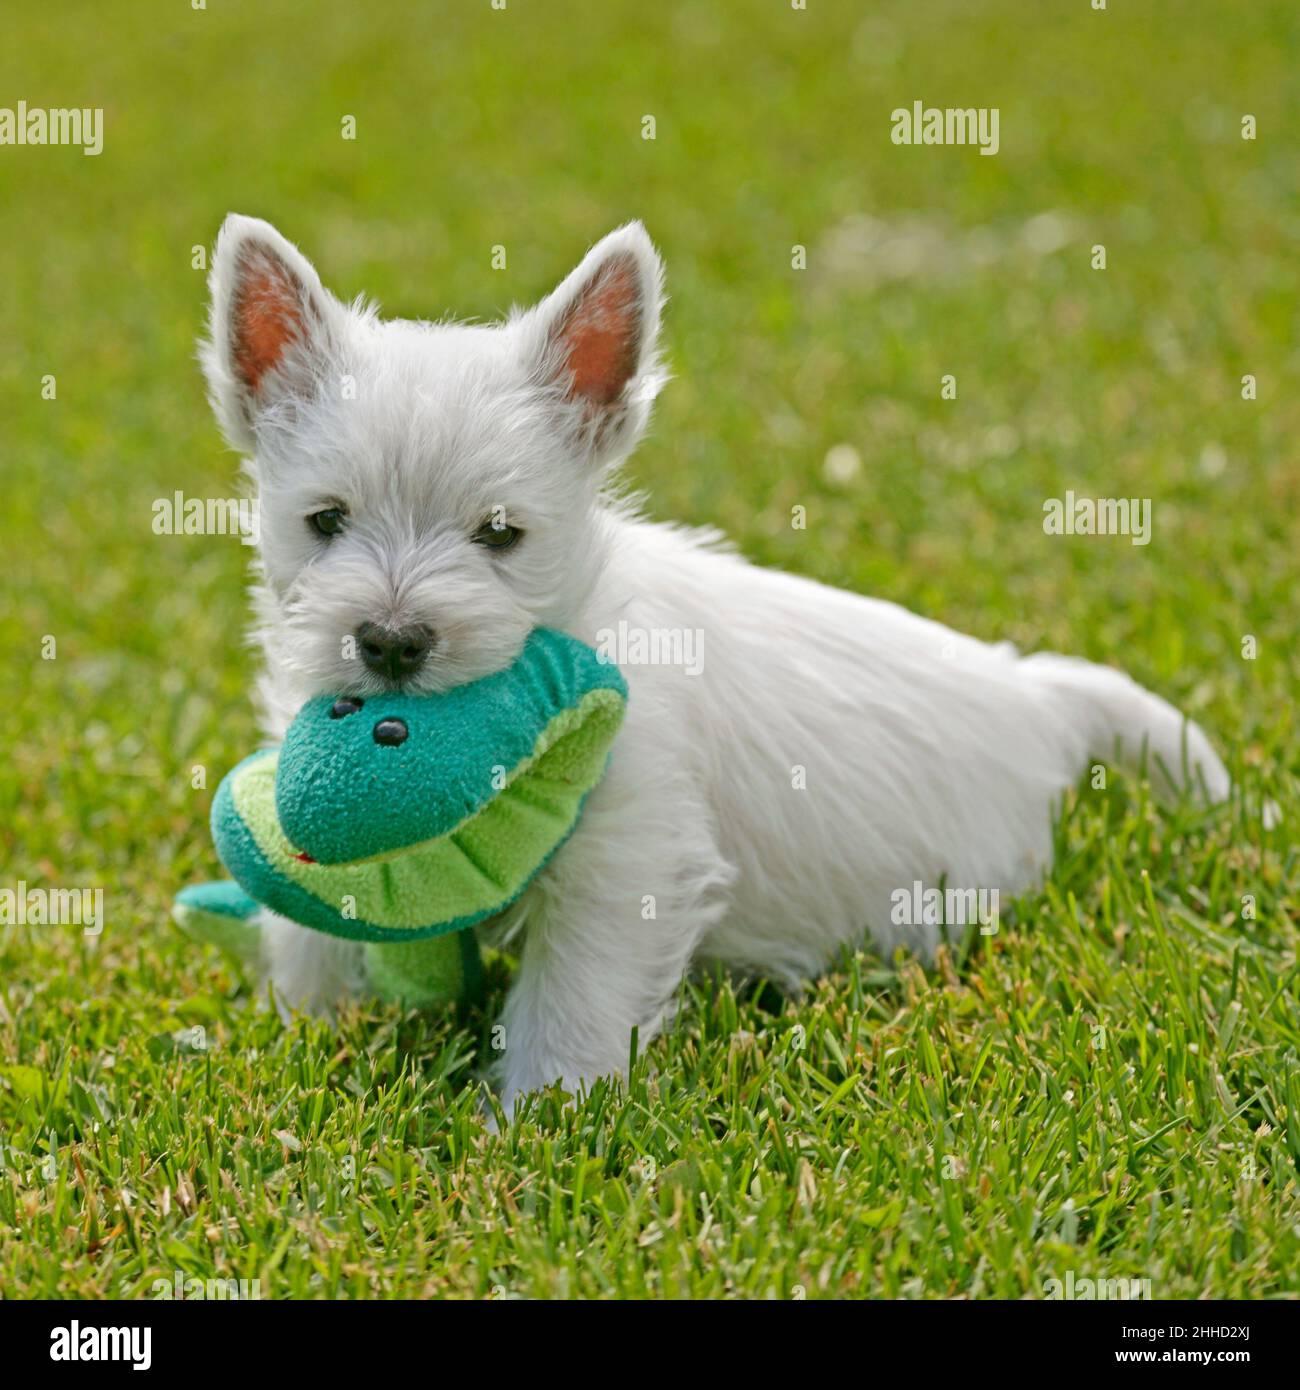 West highland White terrier, puppy on grass, playing with toy Stock Photo